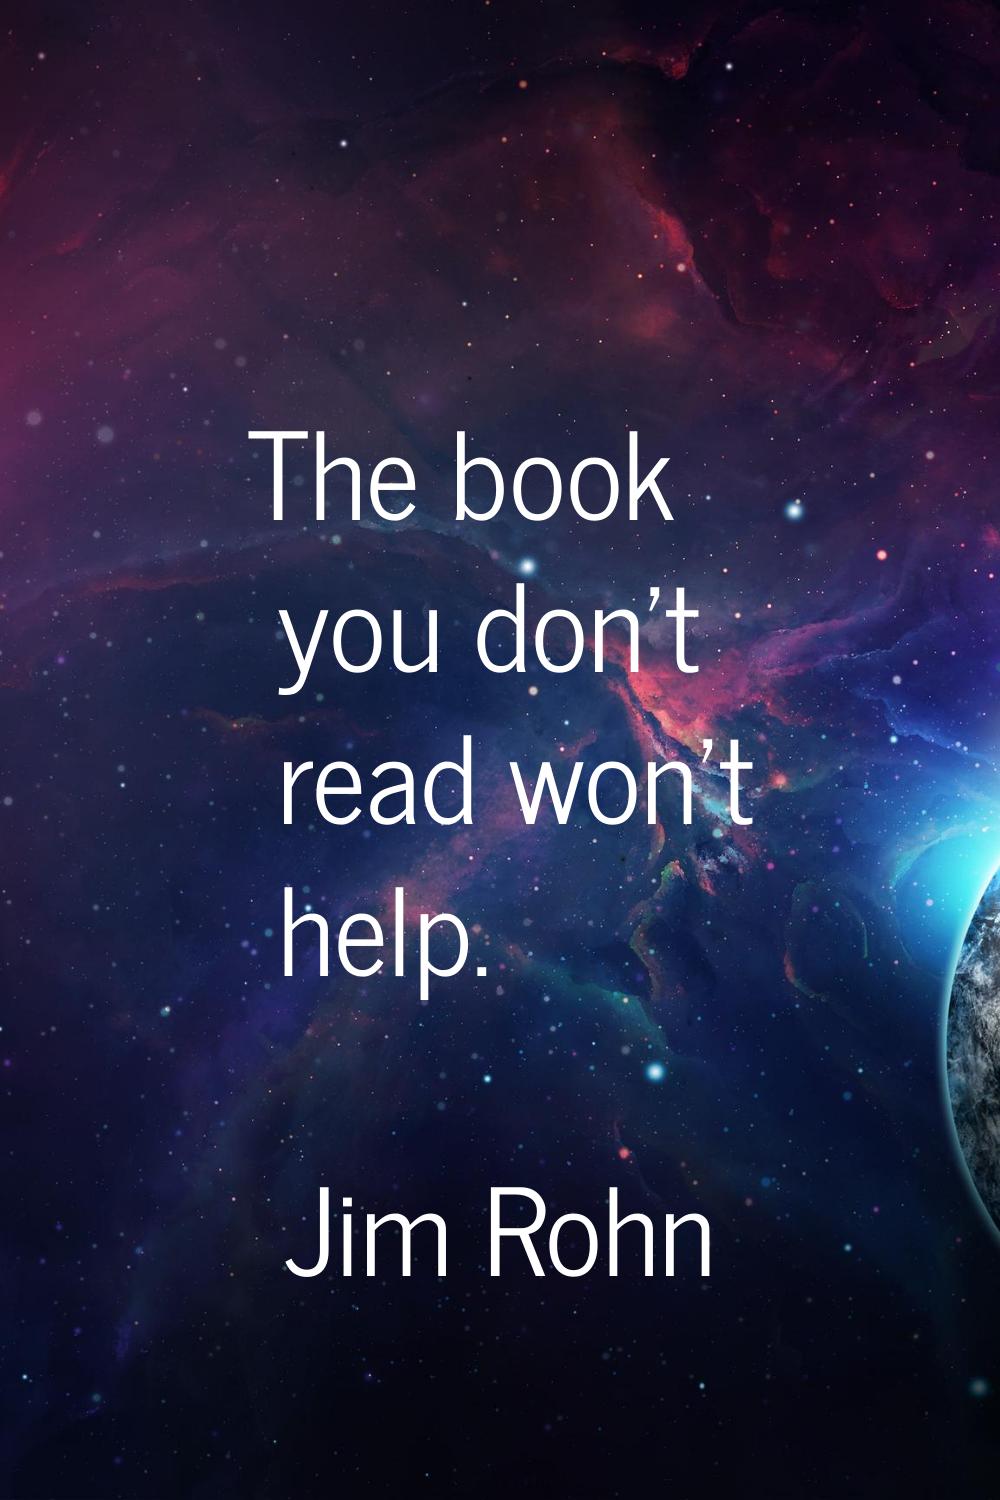 The book you don't read won't help.